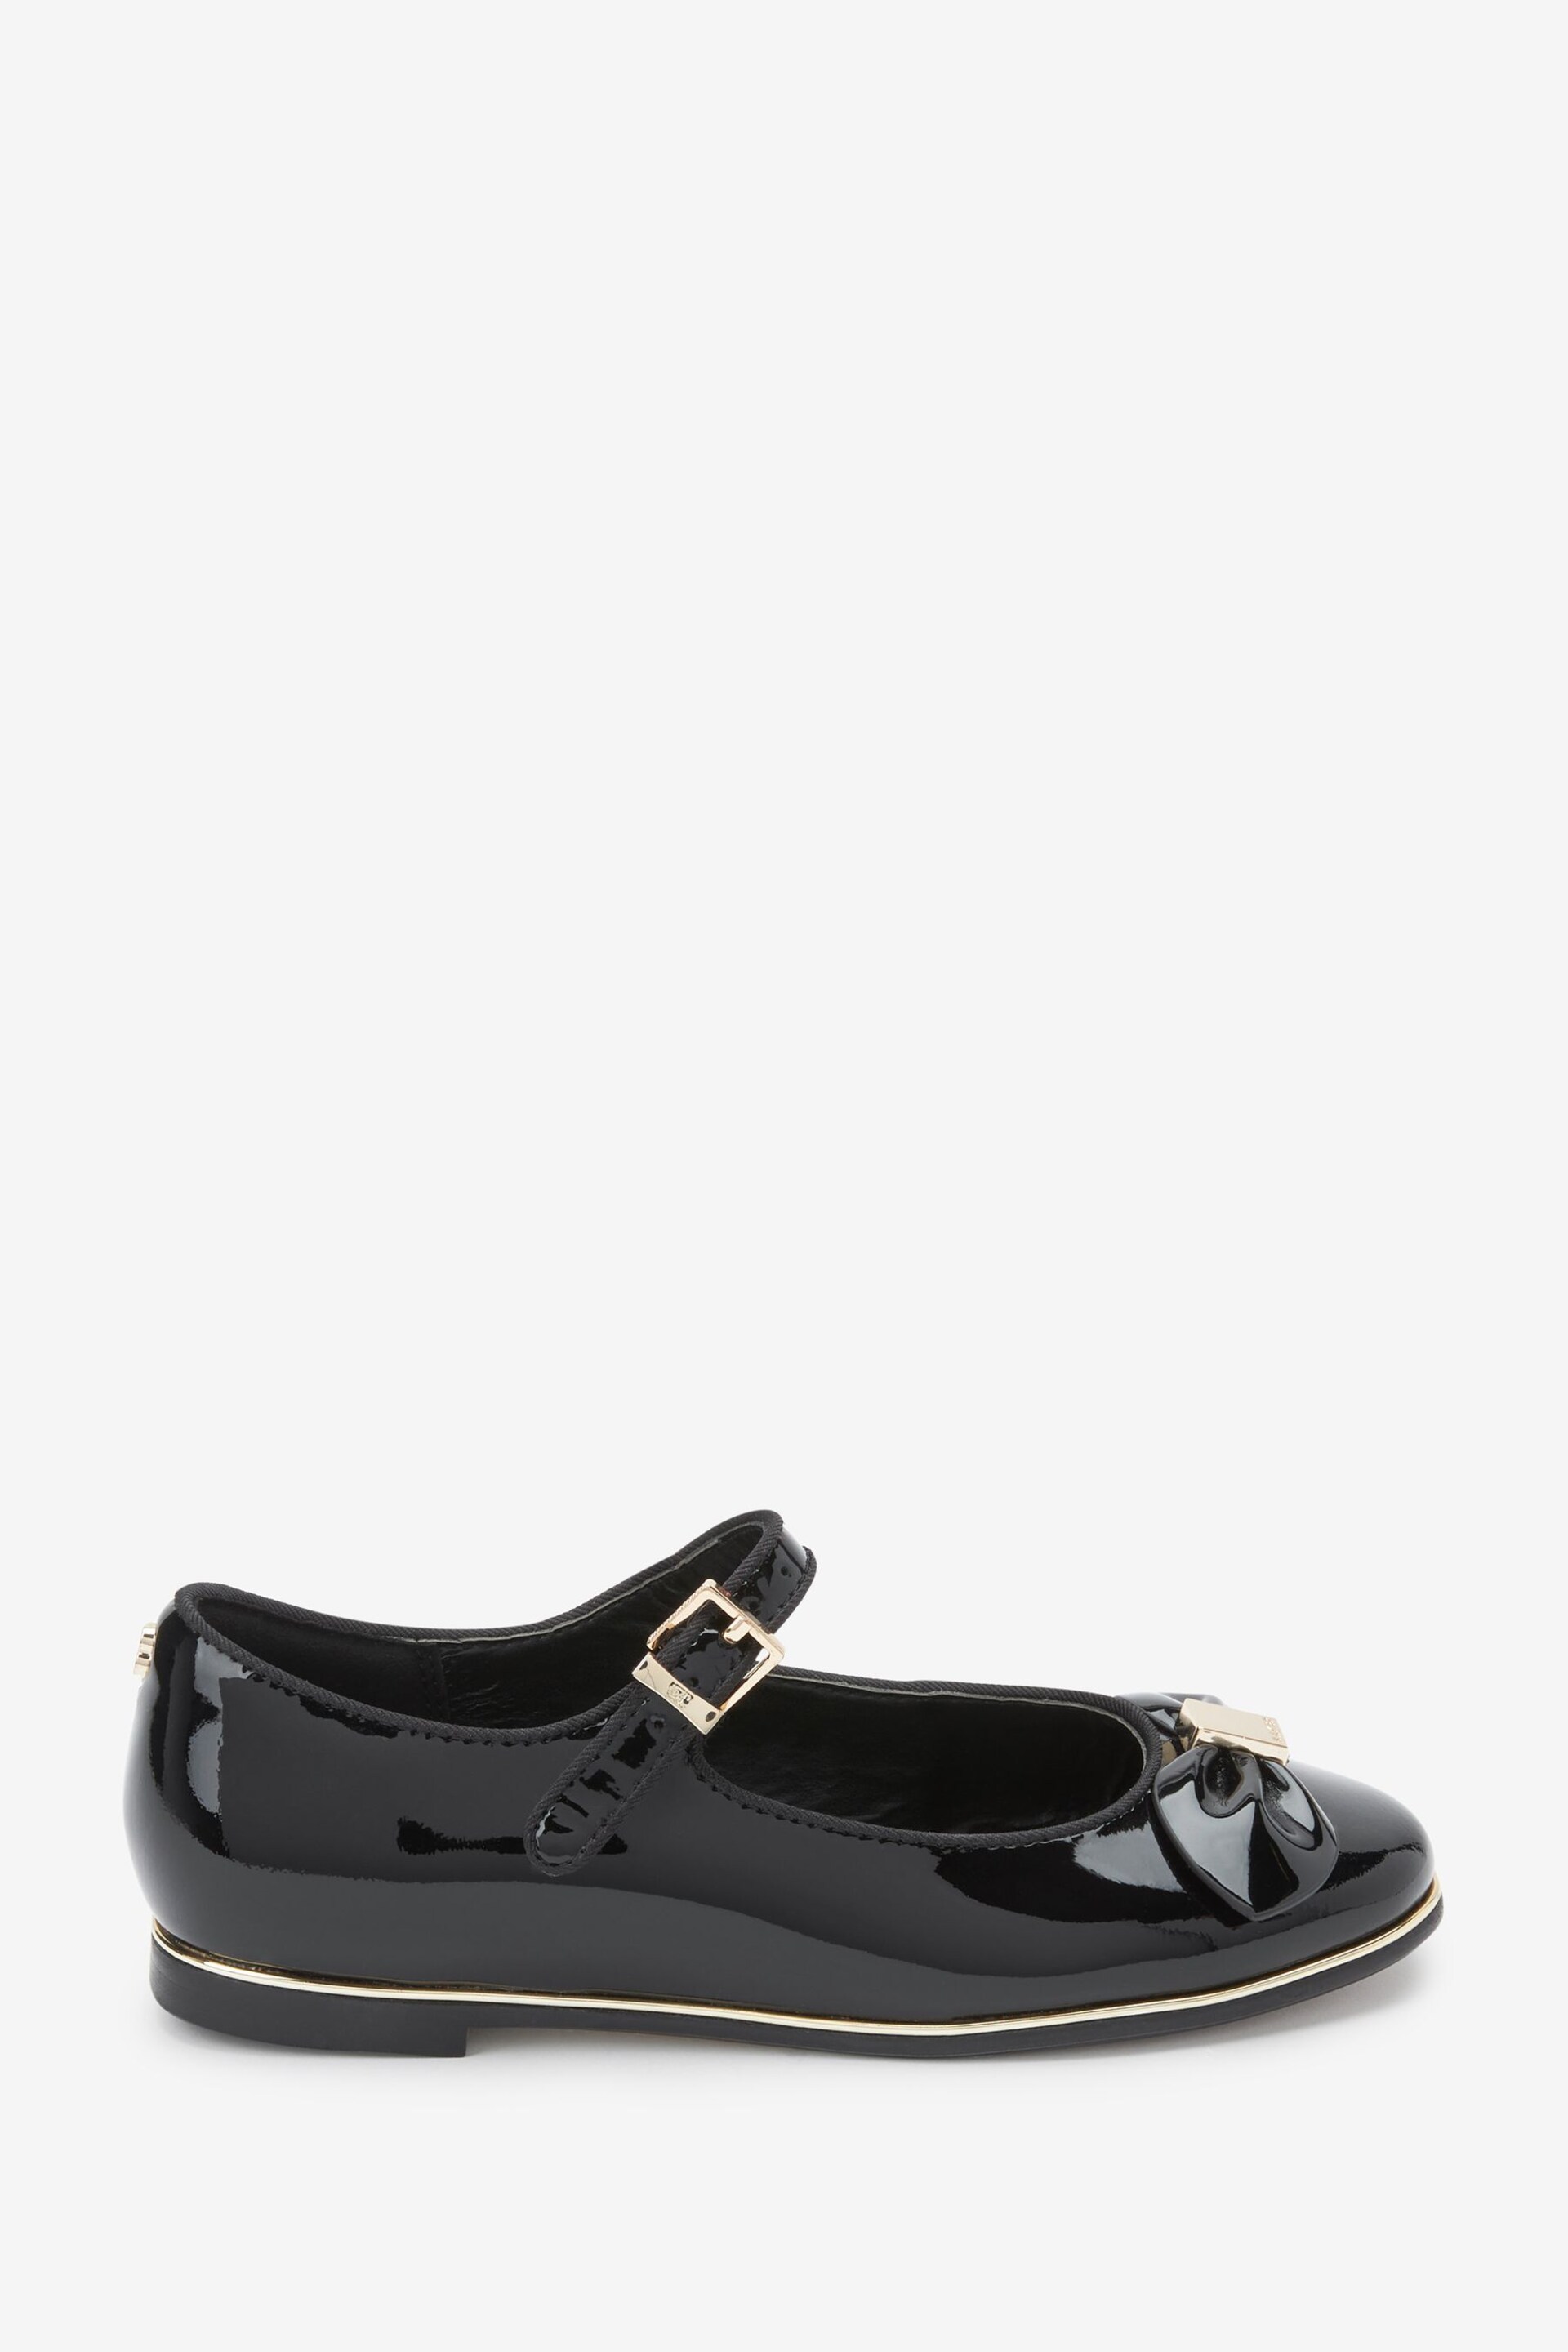 Baker by Ted Baker Black Pat Bow MJ Shoes - Image 1 of 5